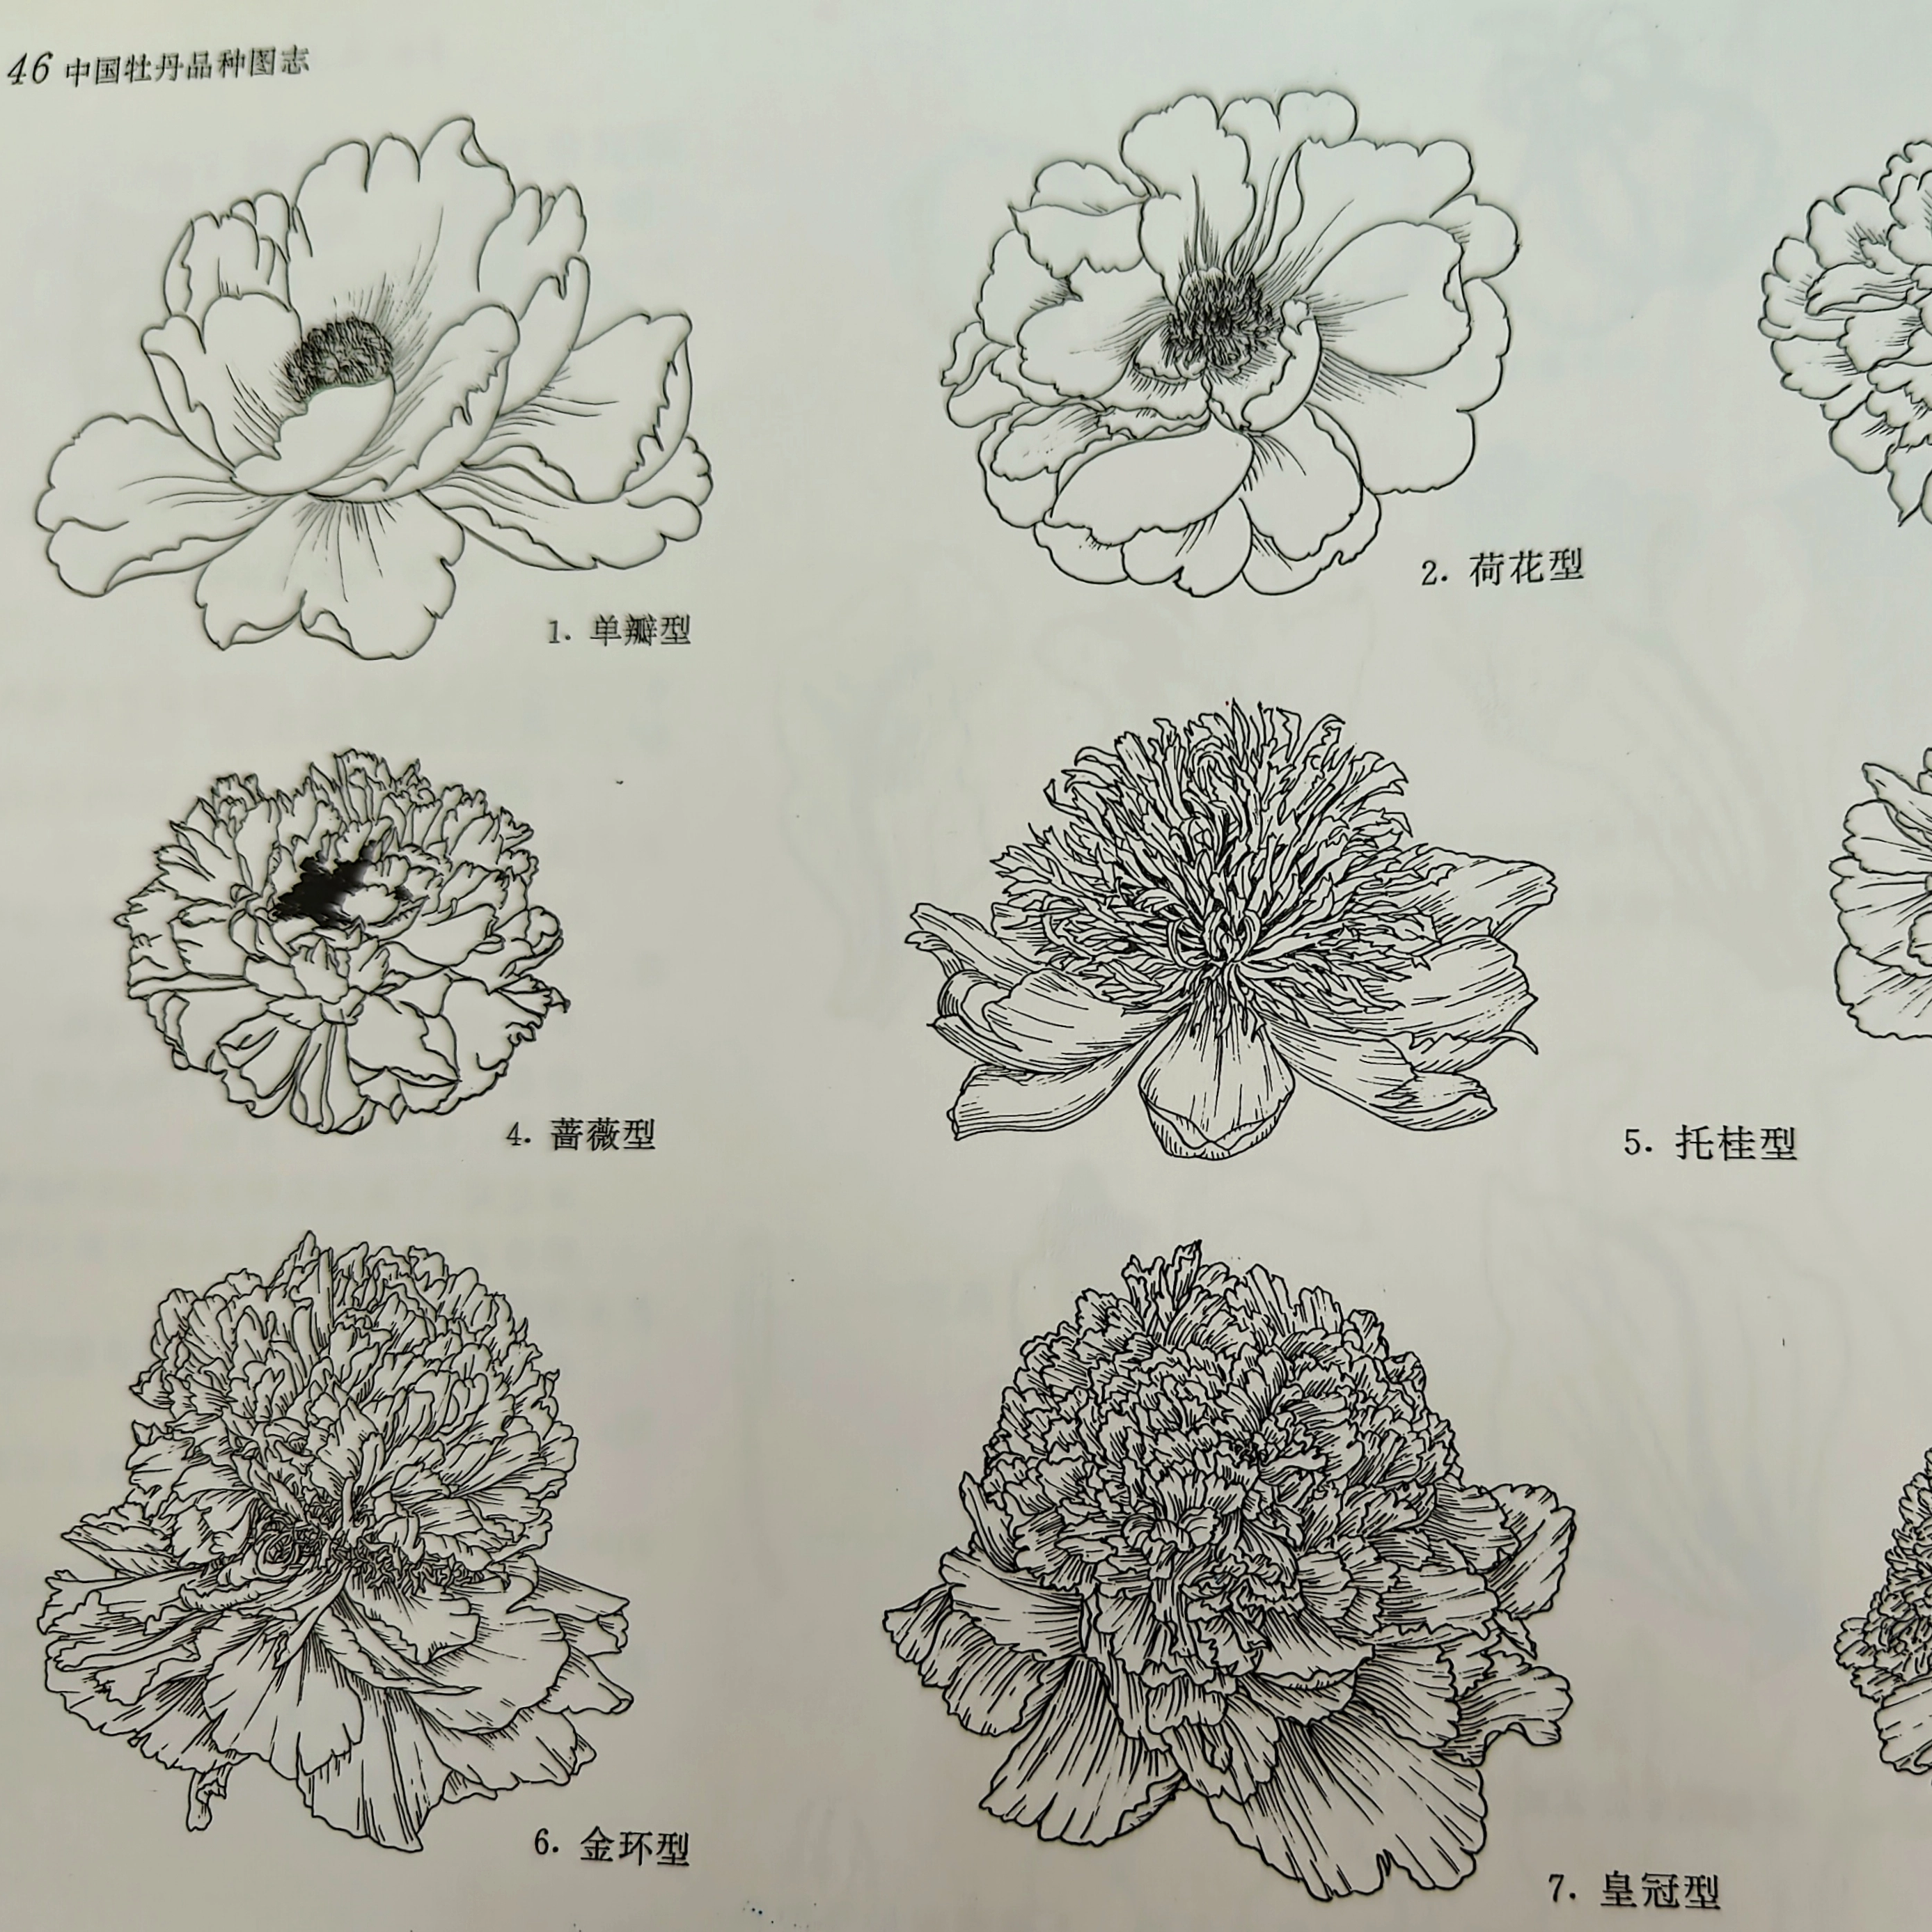 The Flower Pattern of Peony